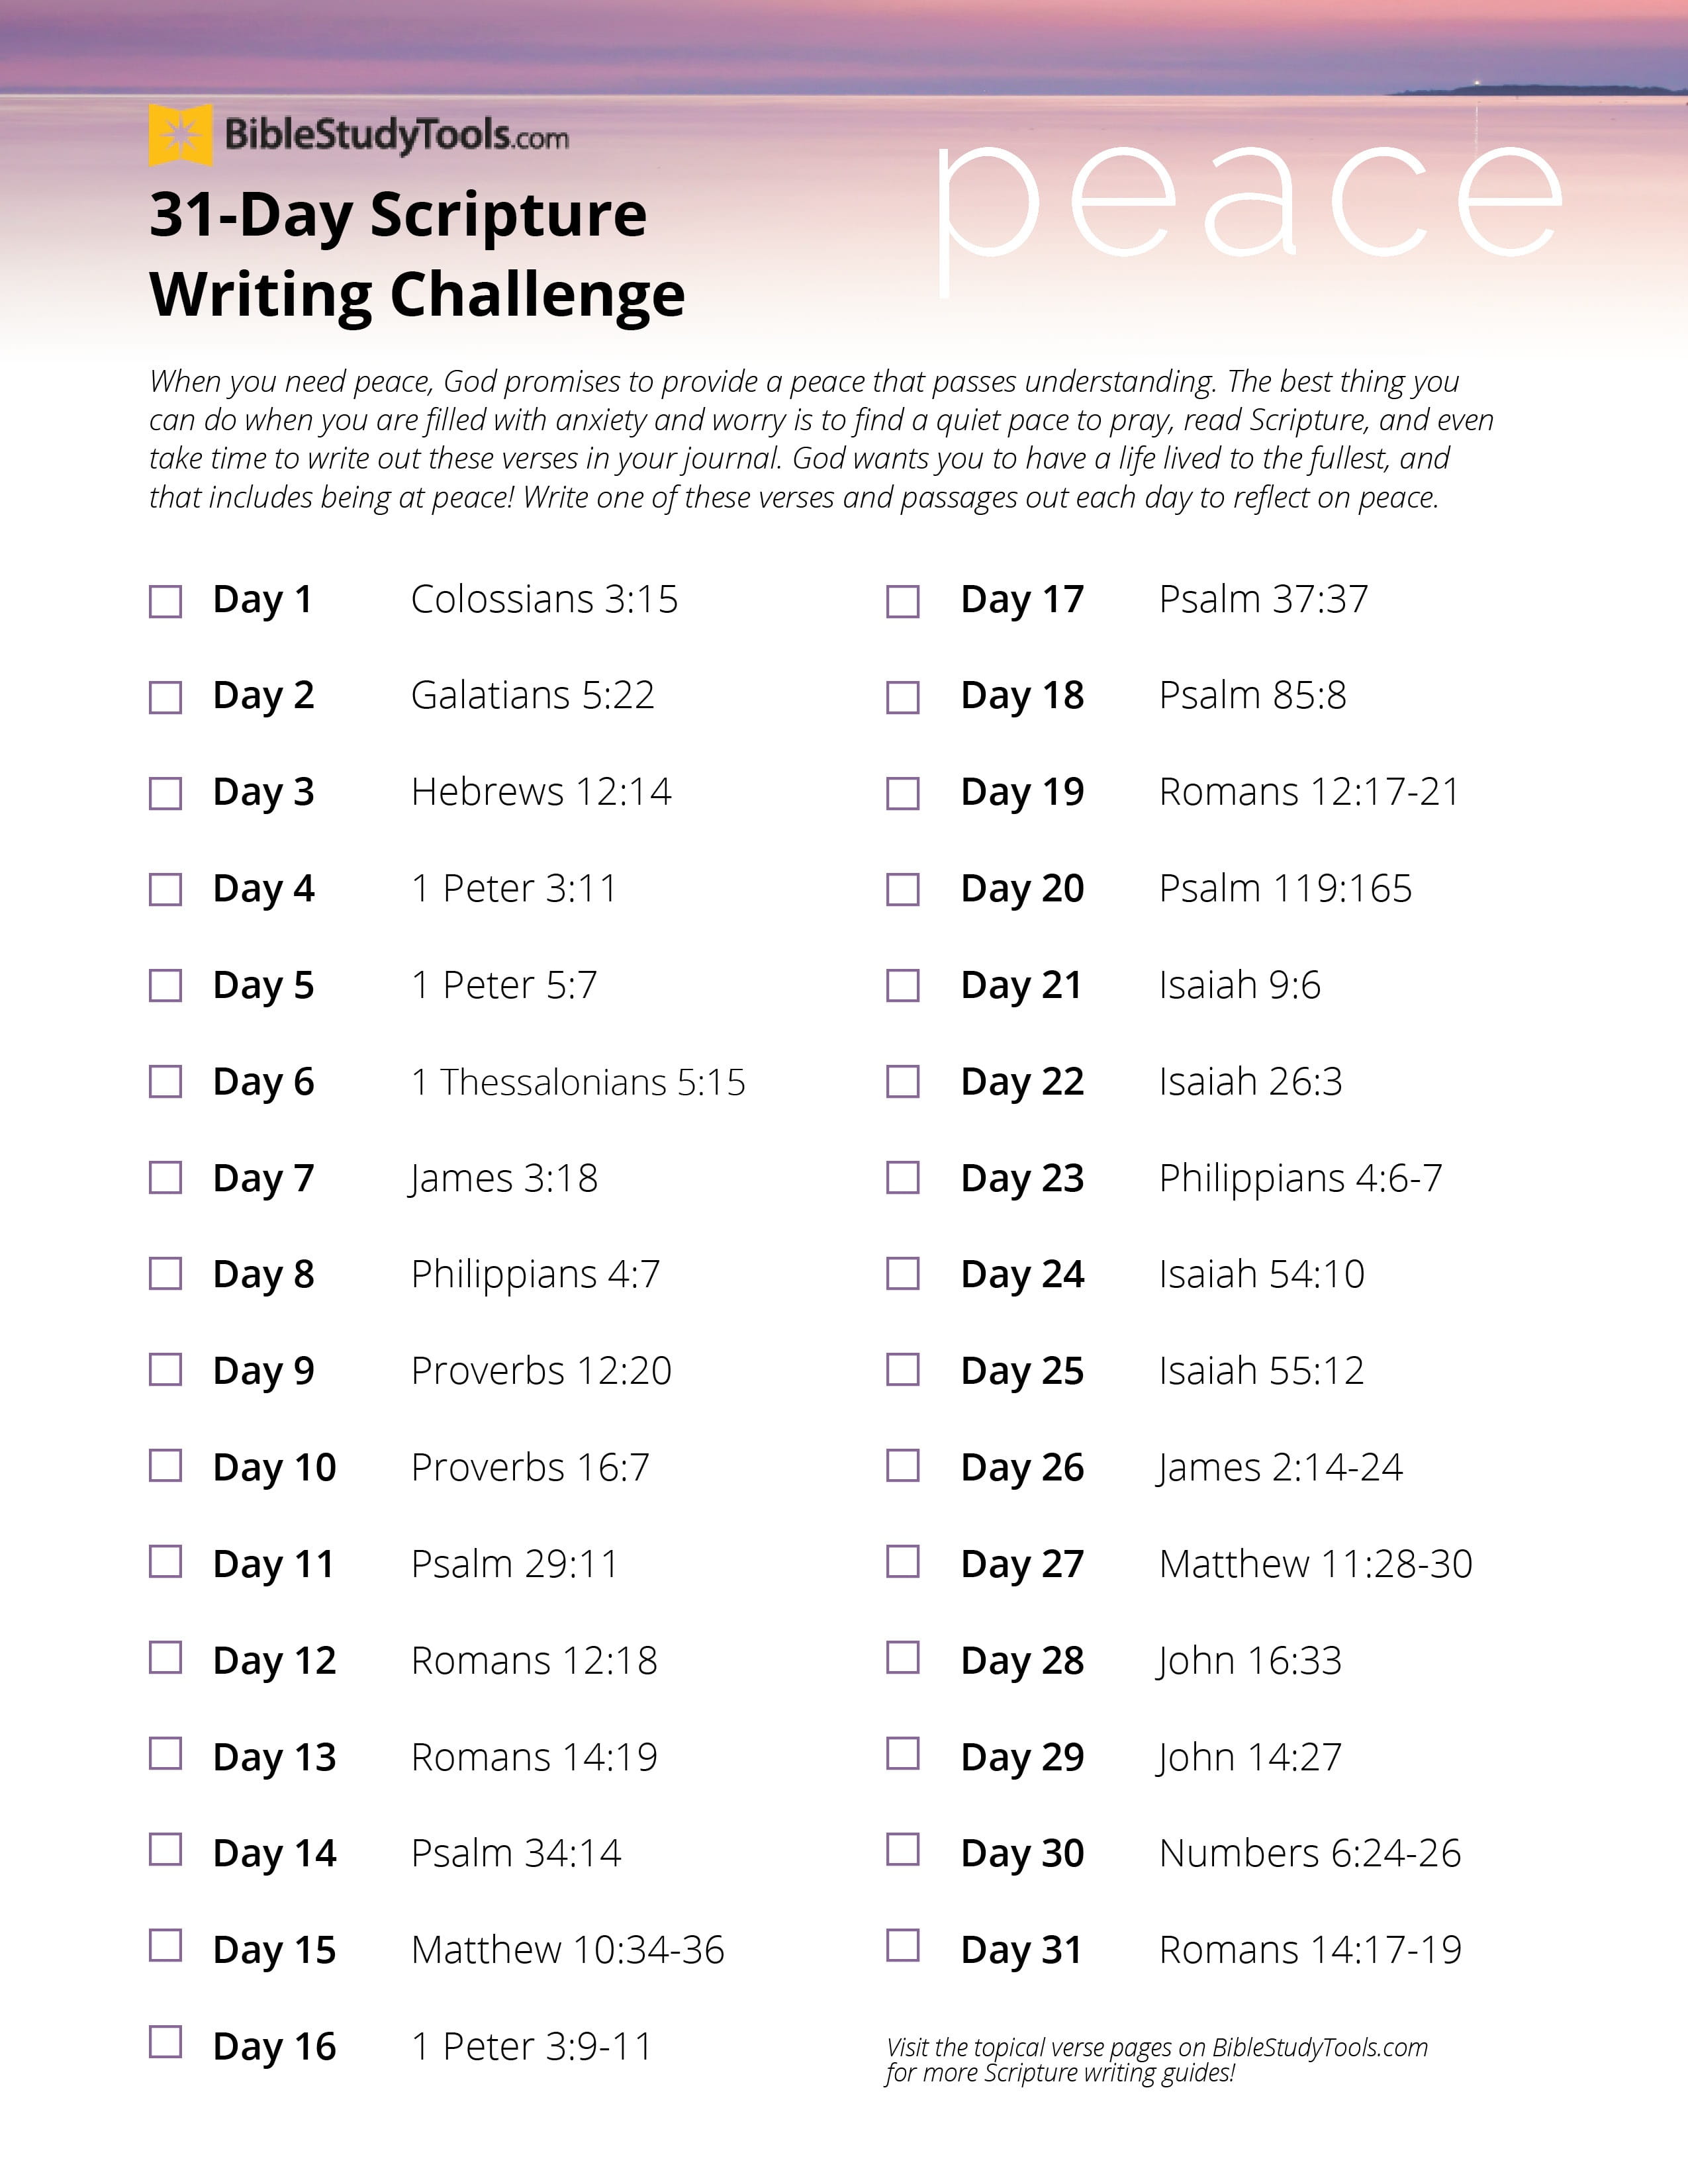 finding-peace-31-day-scripture-writing-challenge-printable-download-free